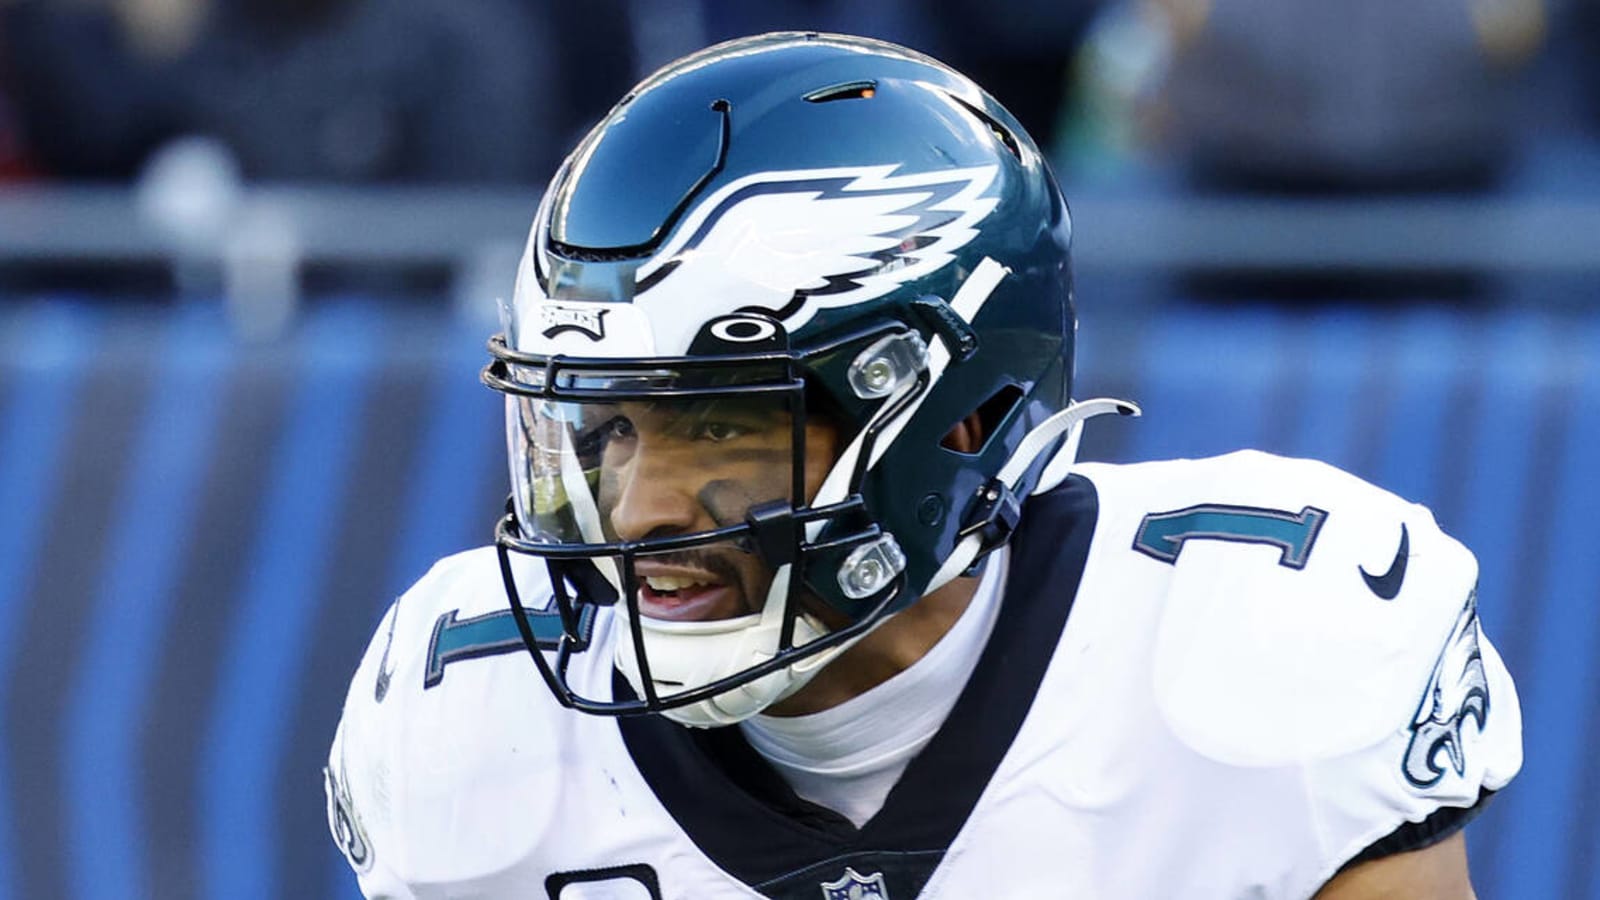 Eagles' Sirianni: 'There's a chance' Hurts plays this week